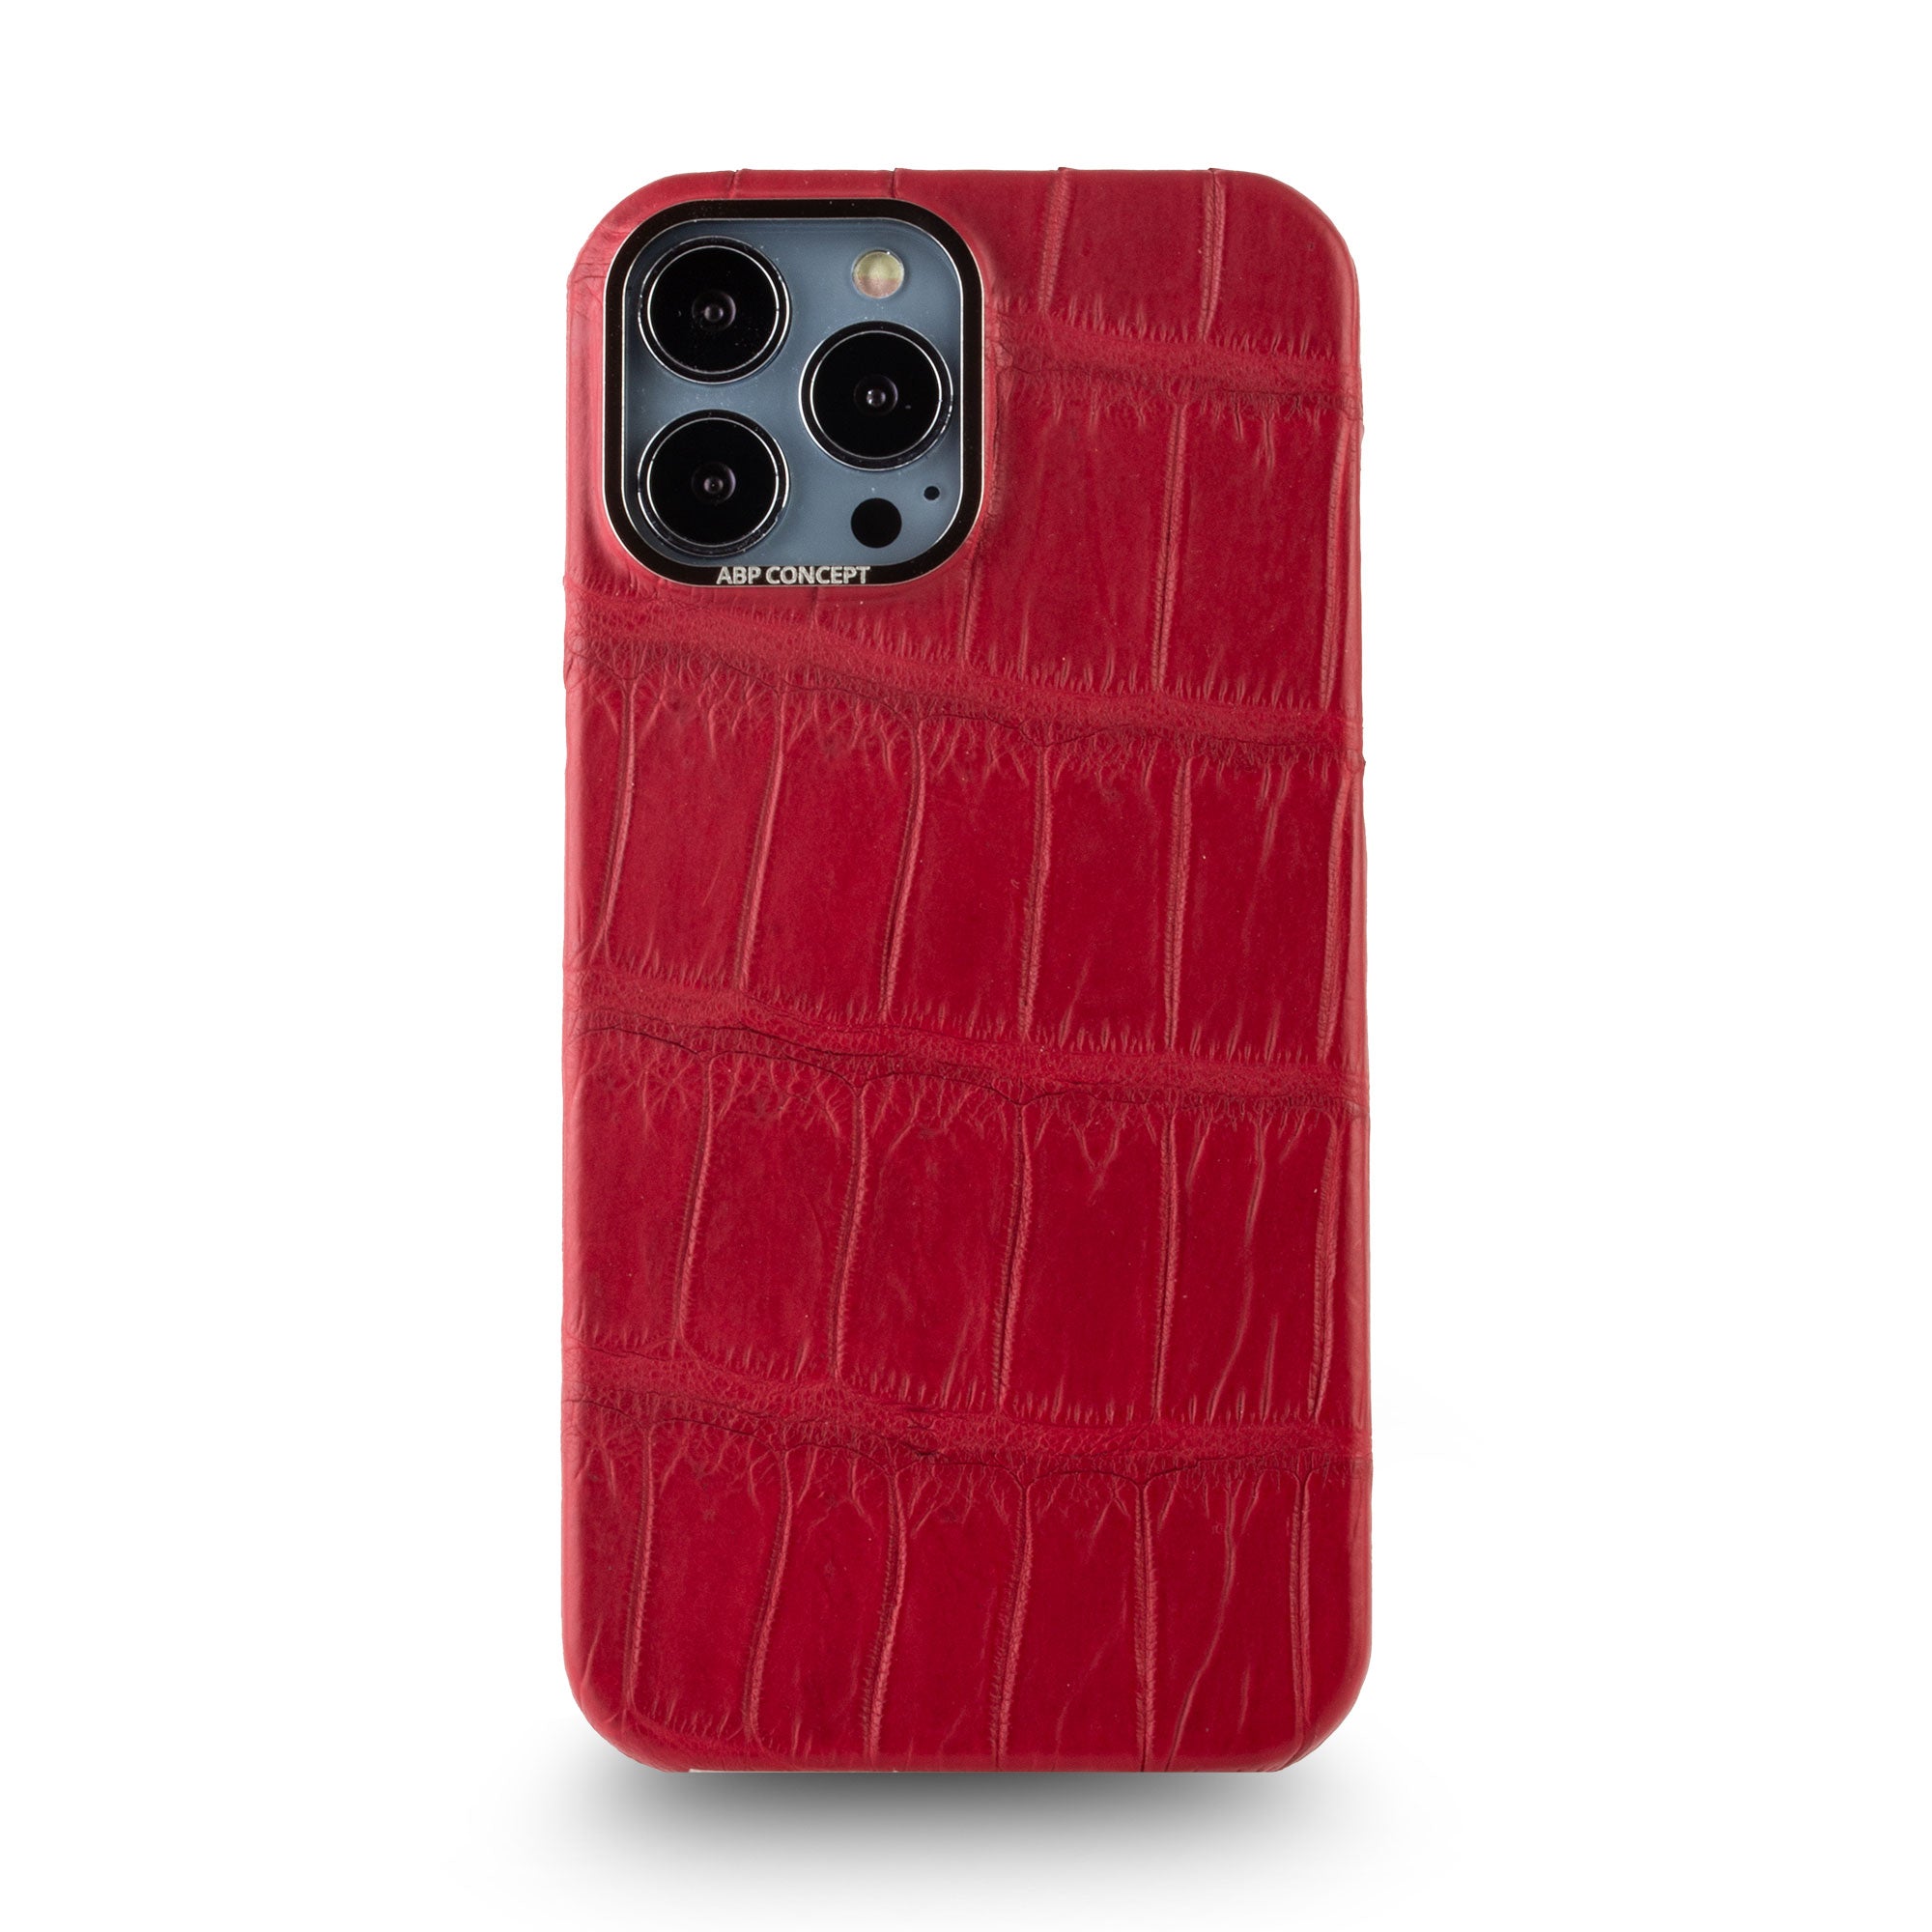 Clearance Sale - Leather iPhone case - iPhone 13 Pro Max - Red alligator